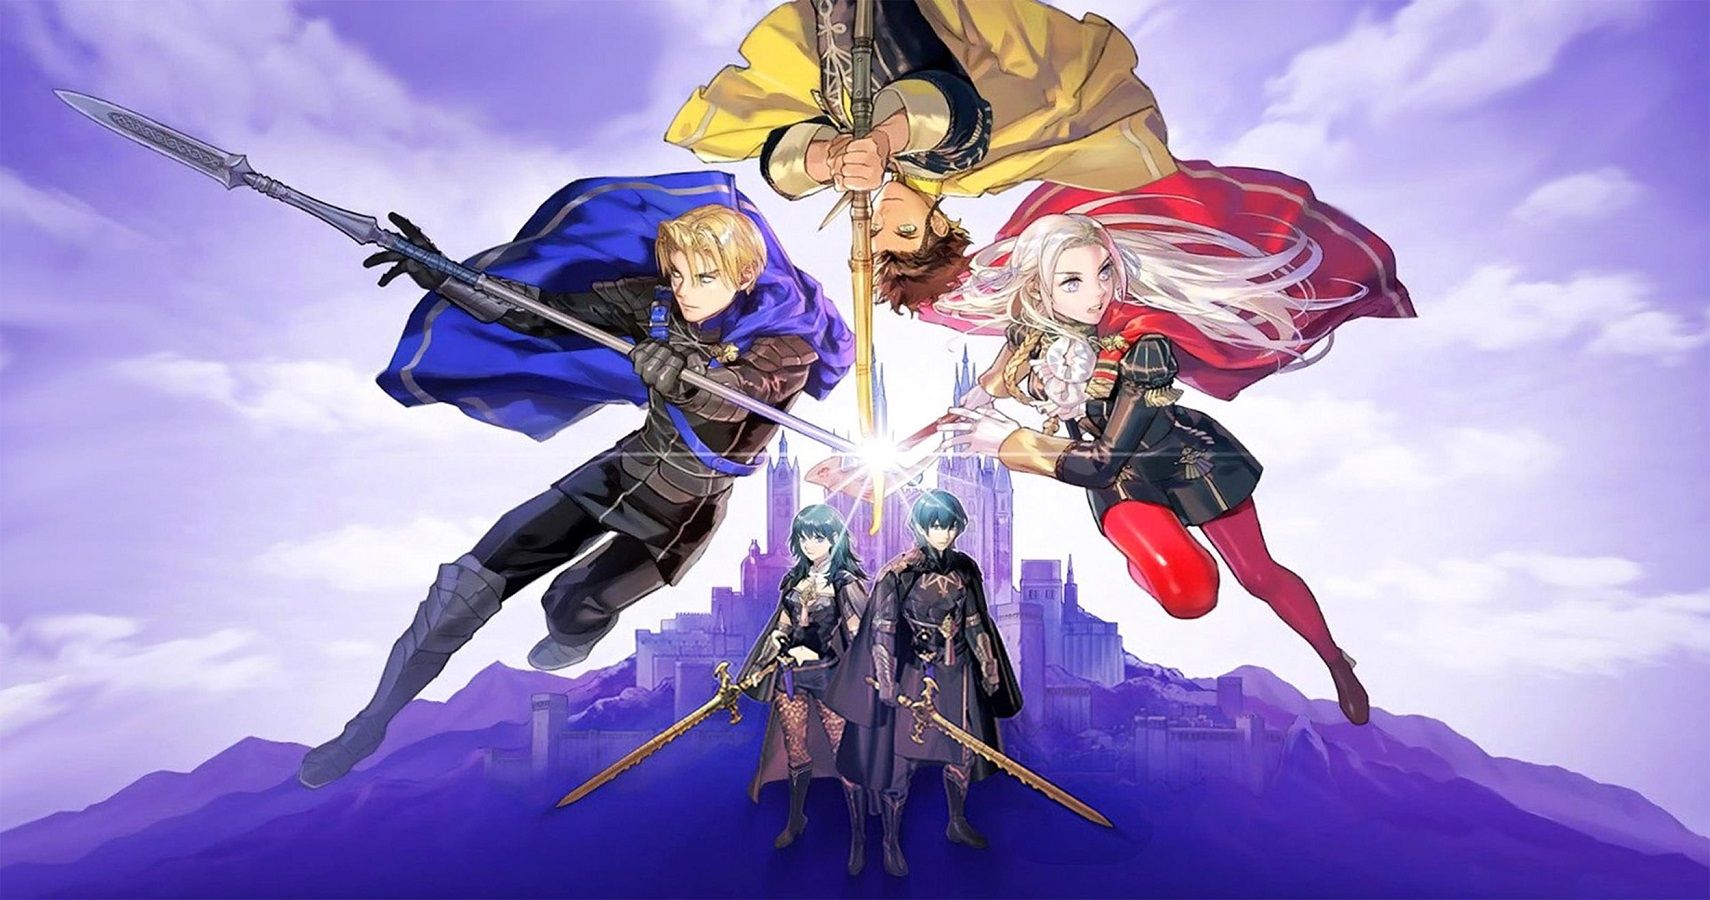 A Sequel Could Actually Work For Fire Emblem Three Houses Without Only One Path Being Canon